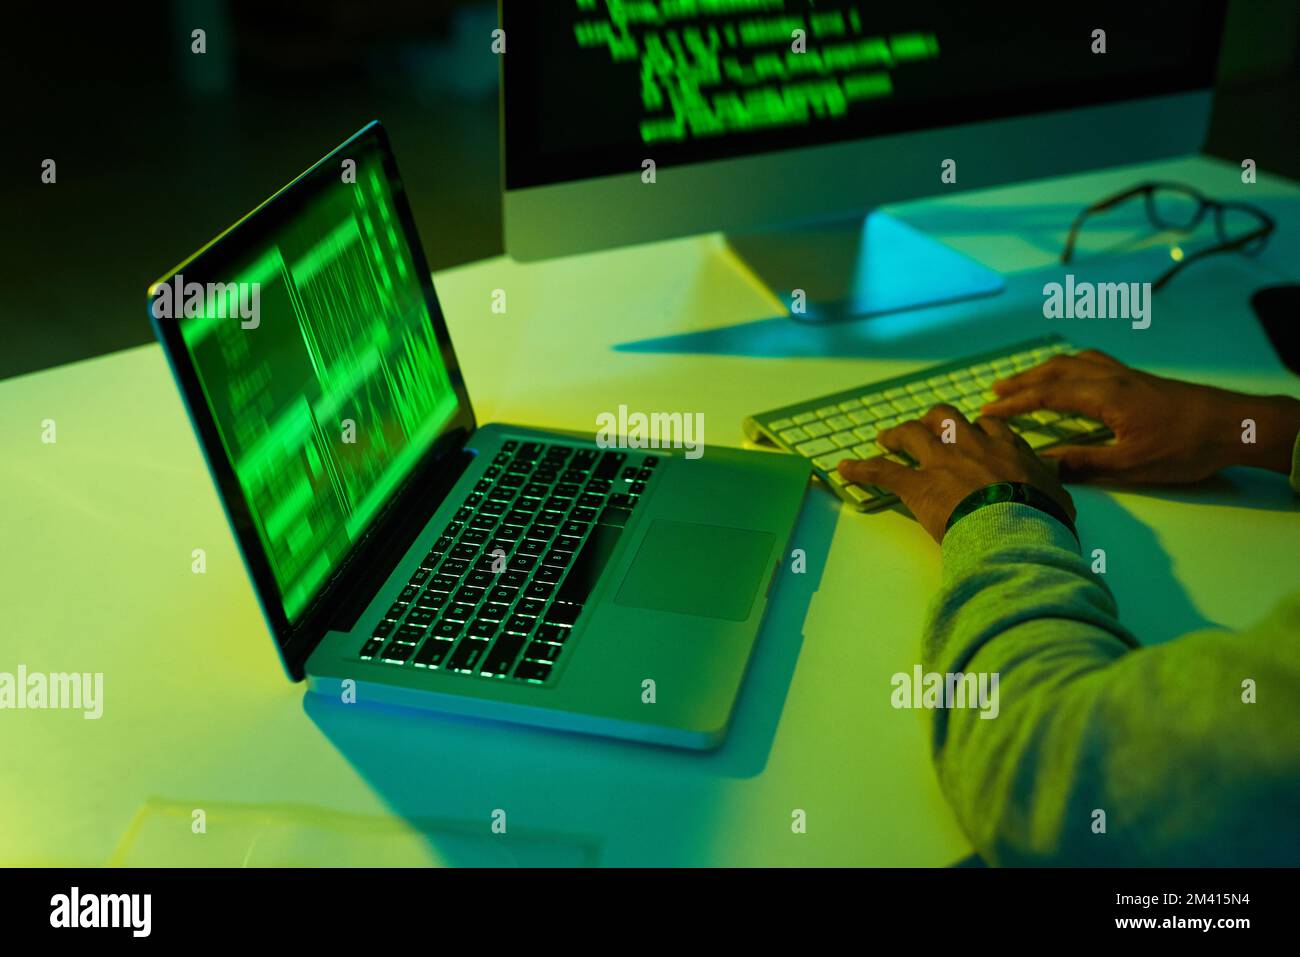 Getting up to no good in the dark. an unrecognizable hacker cracking a computer code in the dark. Stock Photo